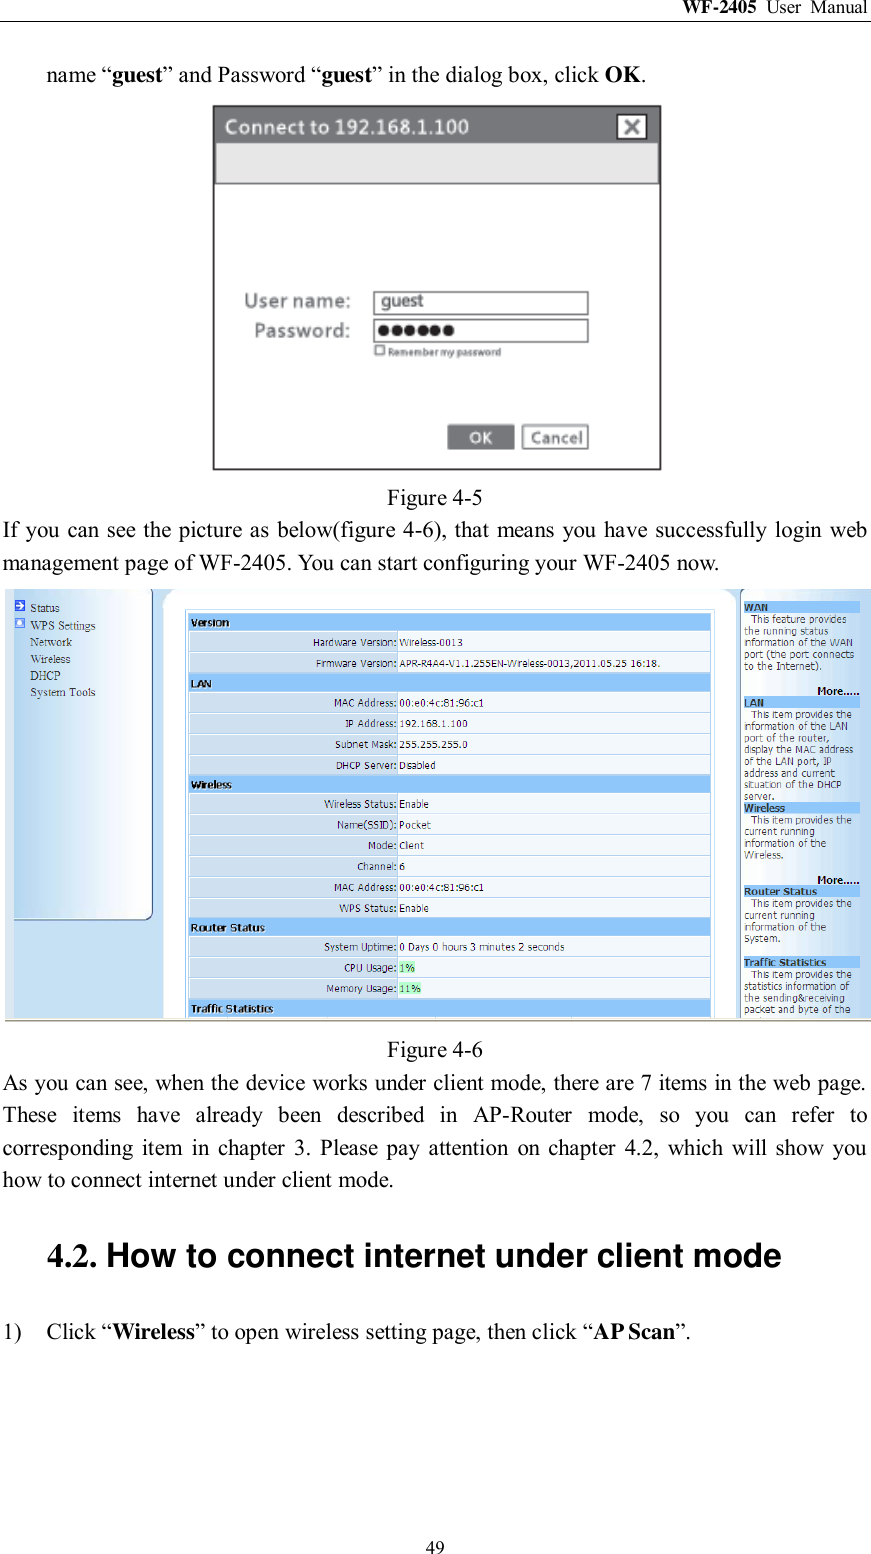 WF-2405  User  Manual  49 name “guest” and Password “guest” in the dialog box, click OK.  Figure 4-5 If you can see  the picture as below(figure 4-6), that means you have successfully login web management page of WF-2405. You can start configuring your WF-2405 now.  Figure 4-6 As you can see, when the device works under client mode, there are 7 items in the web page. These  items  have  already  been  described  in  AP-Router  mode,  so  you  can  refer  to corresponding  item  in  chapter  3.  Please  pay  attention  on  chapter  4.2,  which  will  show  you how to connect internet under client mode. 4.2. How to connect internet under client mode 1) Click “Wireless” to open wireless setting page, then click “AP Scan”. 